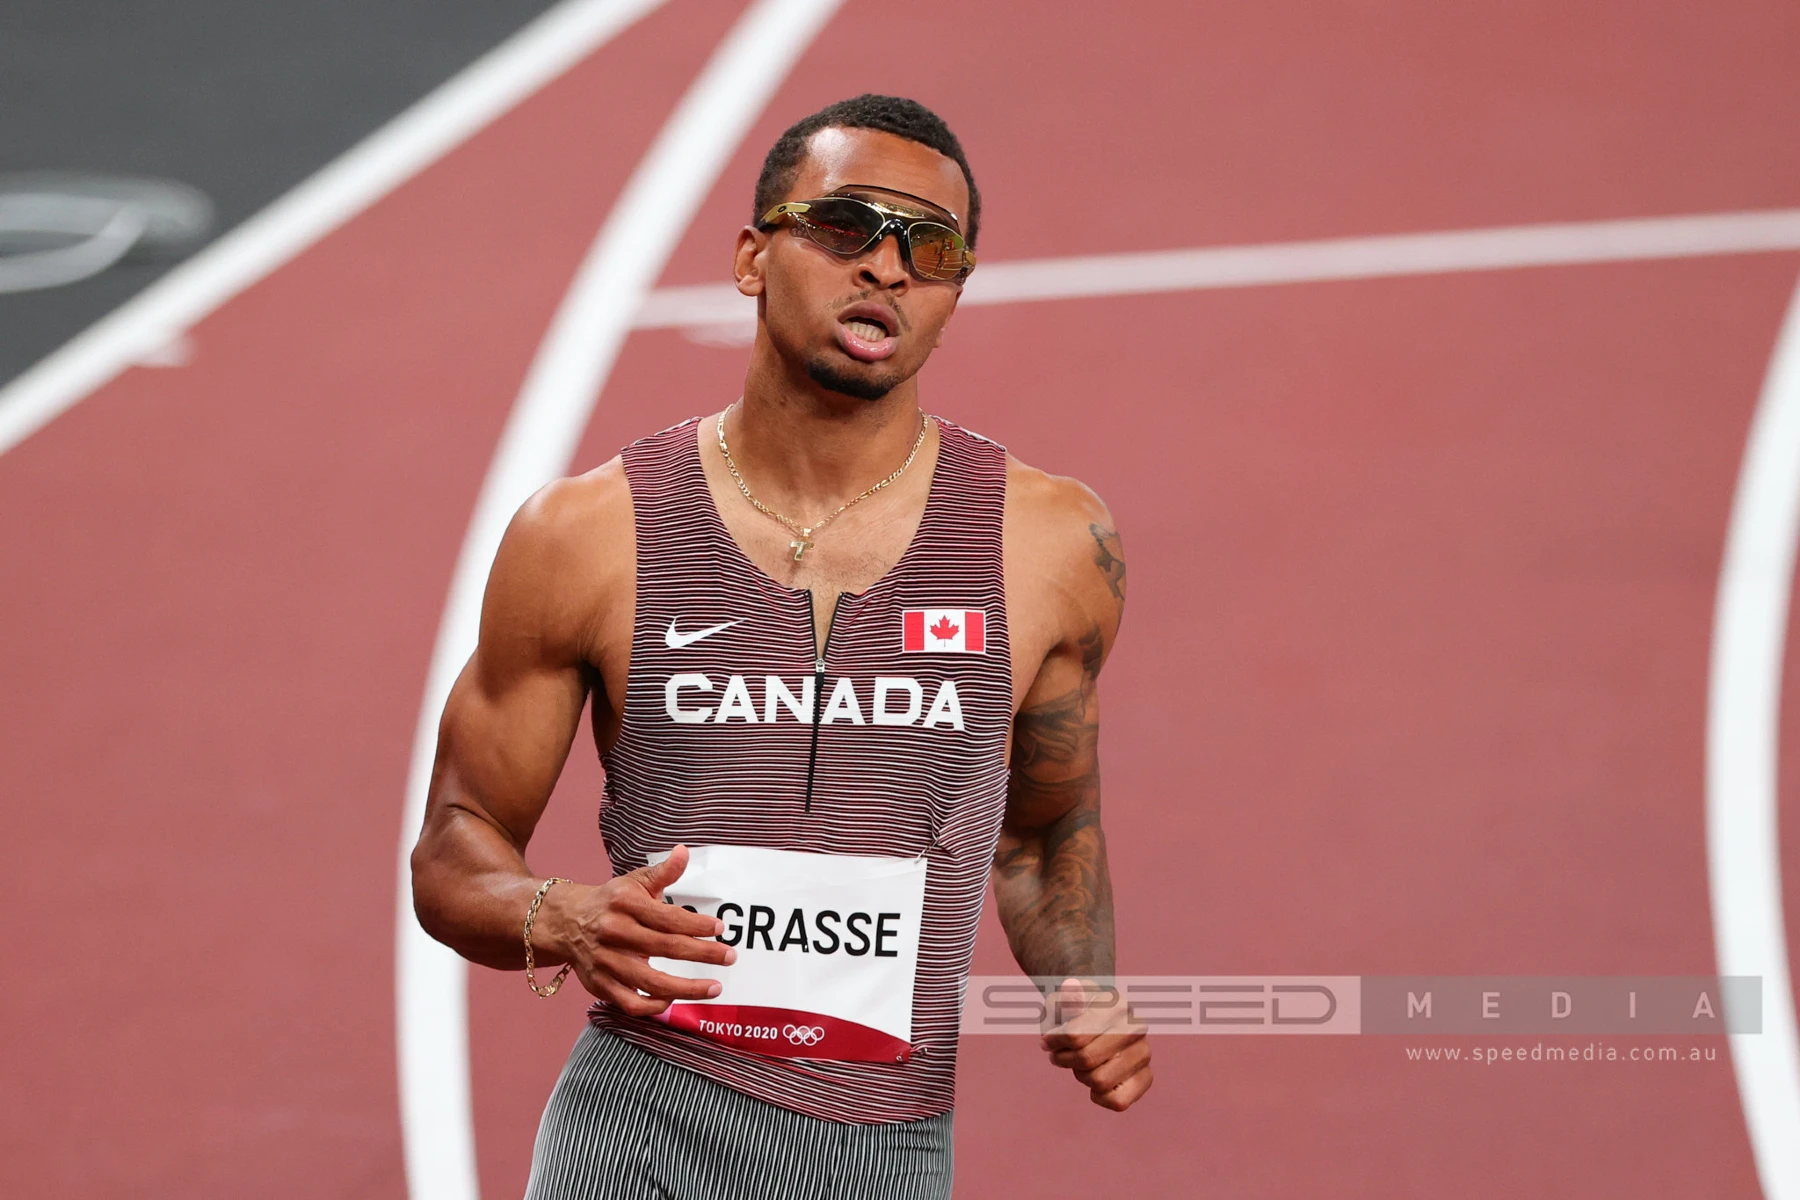 De Grasse back in full training, doubtful about 200m at World Athletics Championships